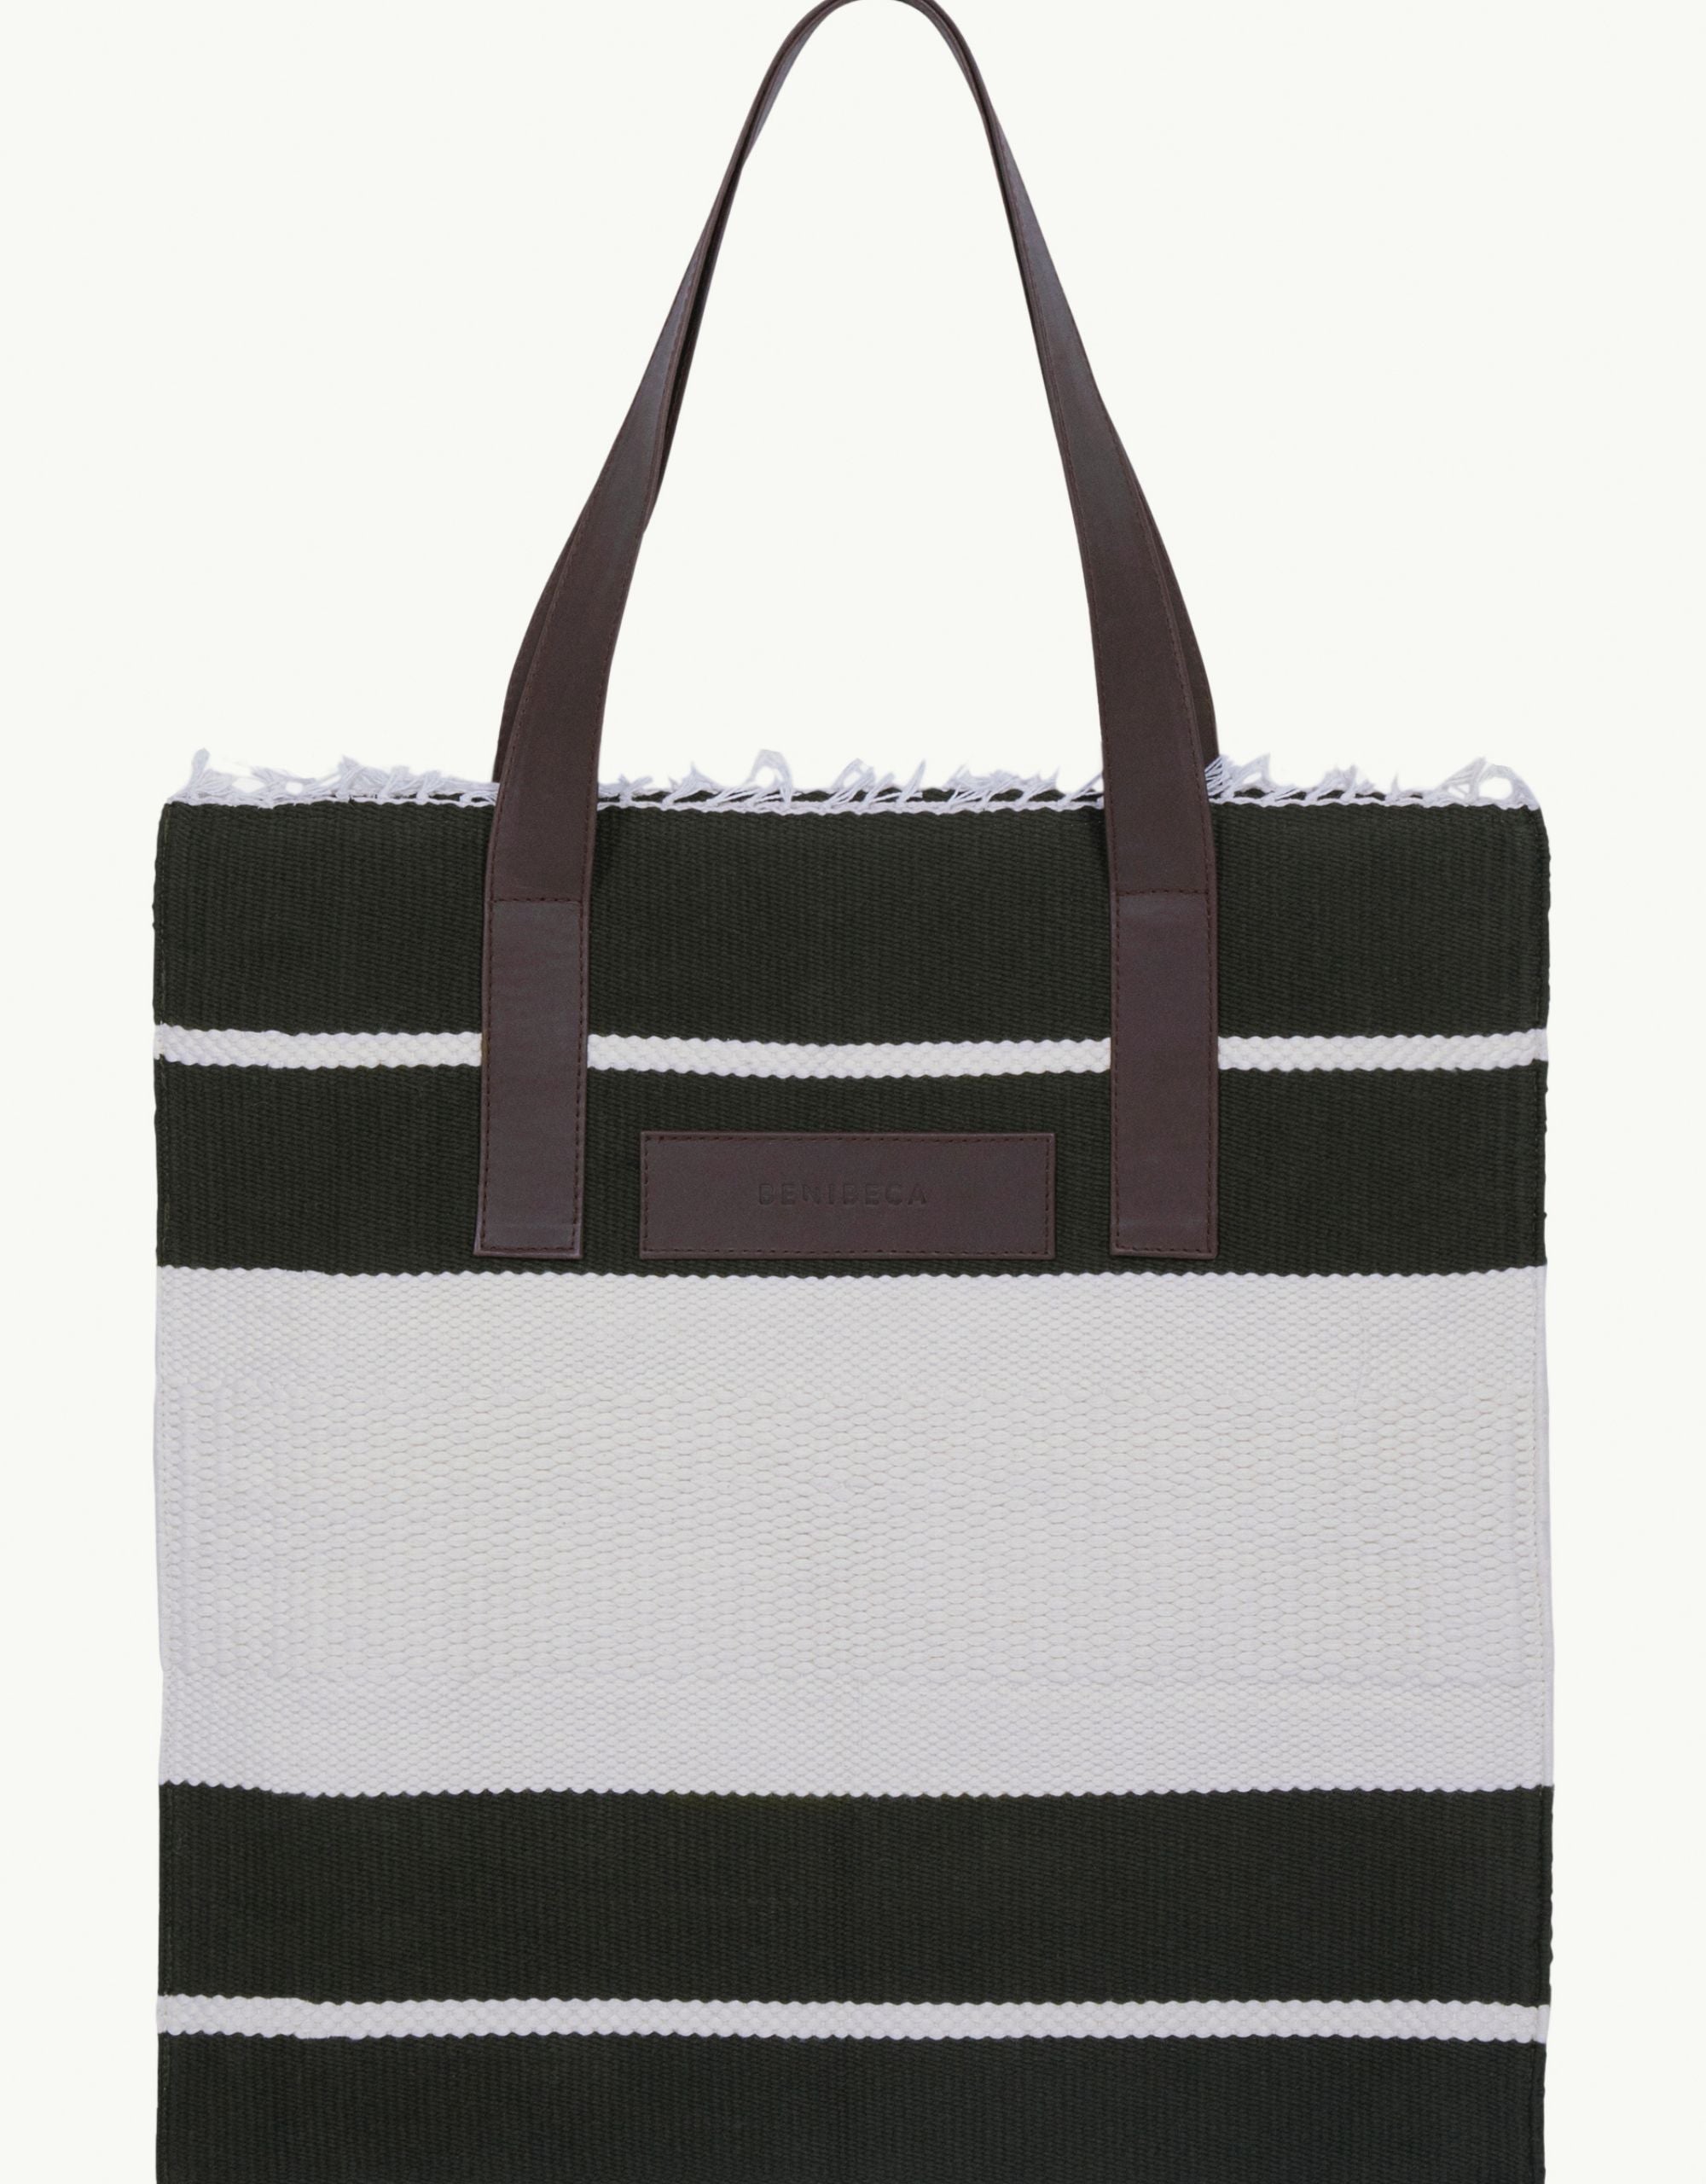 Explore our handcrafted tote bag, inspired by Peruvian artisanship. This two-tone cotton weave tote showcases naturally tanned crust cowhide and tocuyo cotton lining, complete with dual compartments and pockets for practical elegance. Browse our selection of Peruvian artisan tote bags.